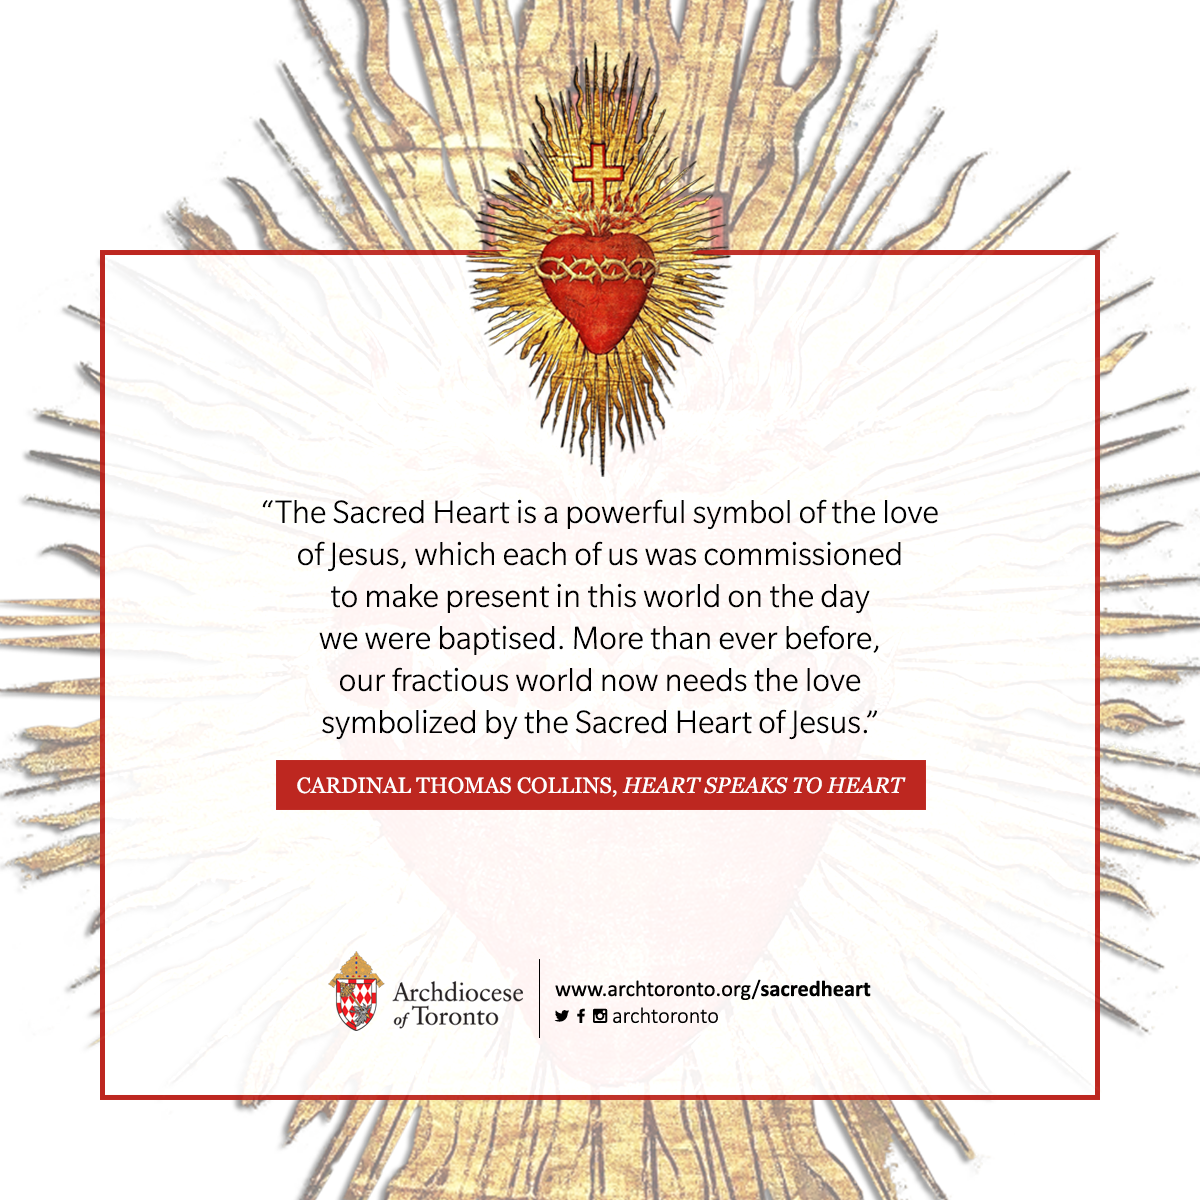 The Sacred Heart is a powerful symbol of the love of Jesus, which each of us was commissioned to make present in this world on the day we were baptised. More than ever before, our fractious world now needs the love symbolized by the Sacred Heart of Jesus.